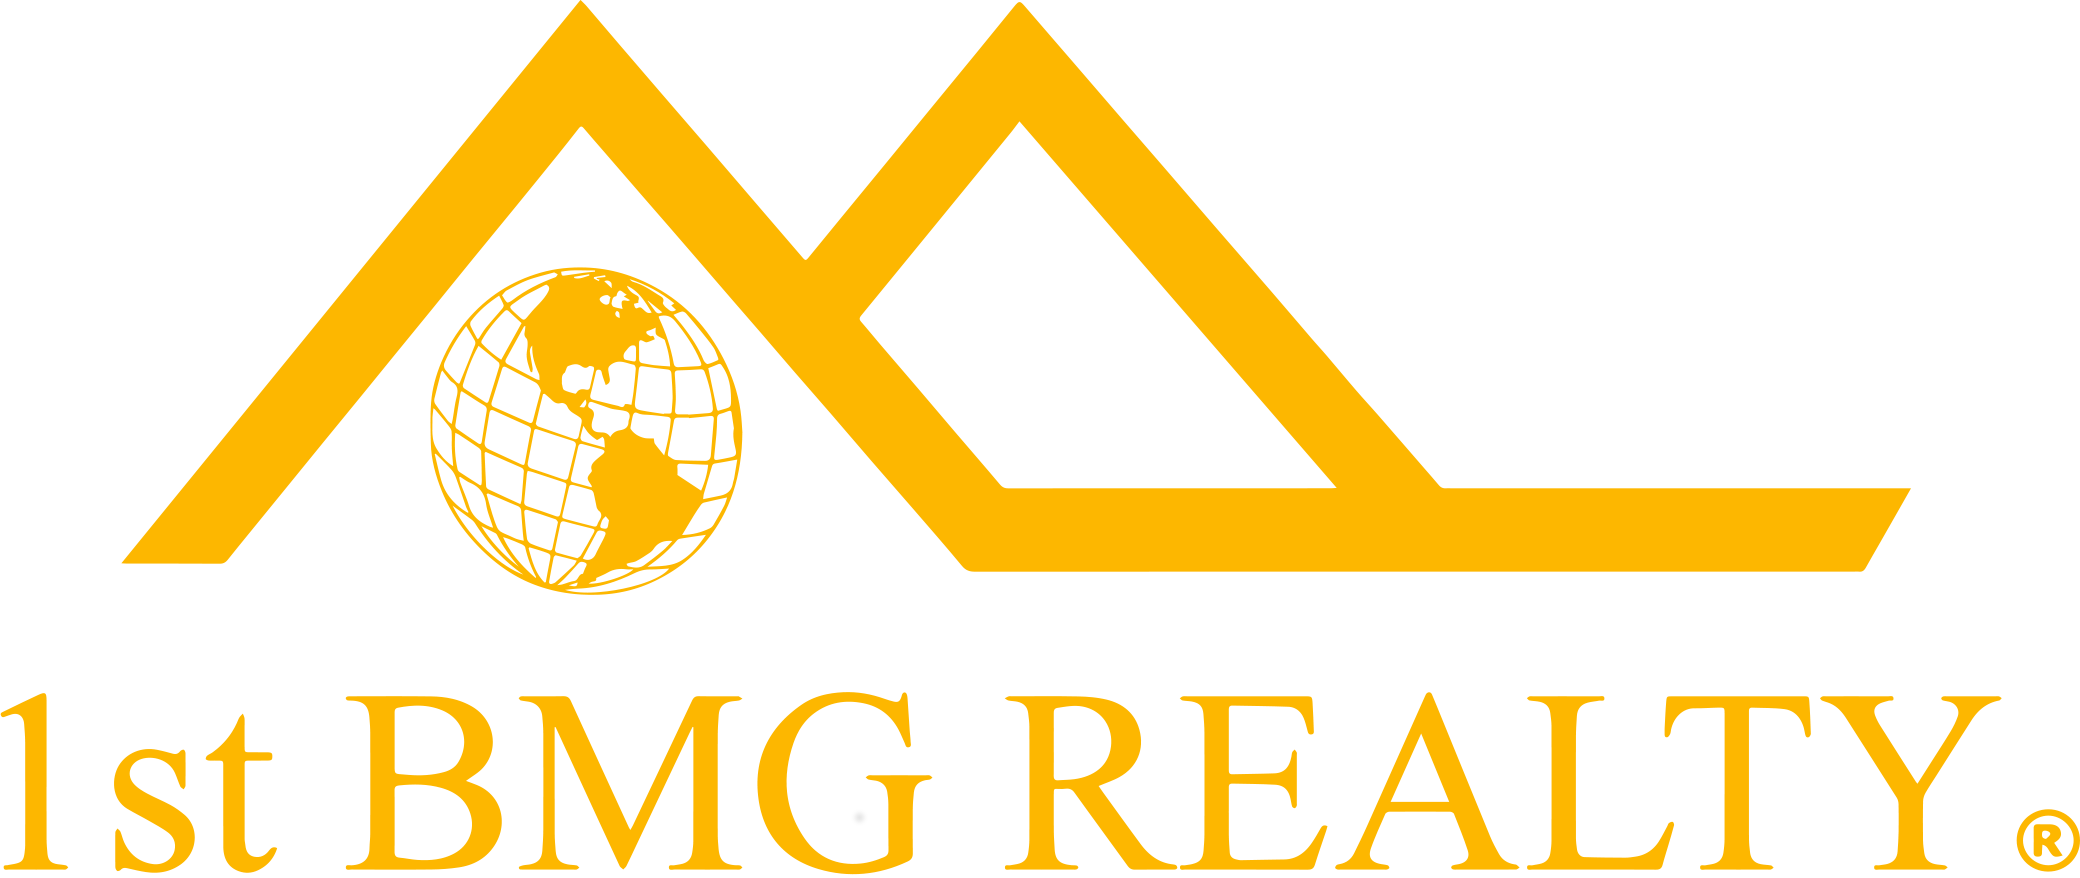 1st BMG REALTY